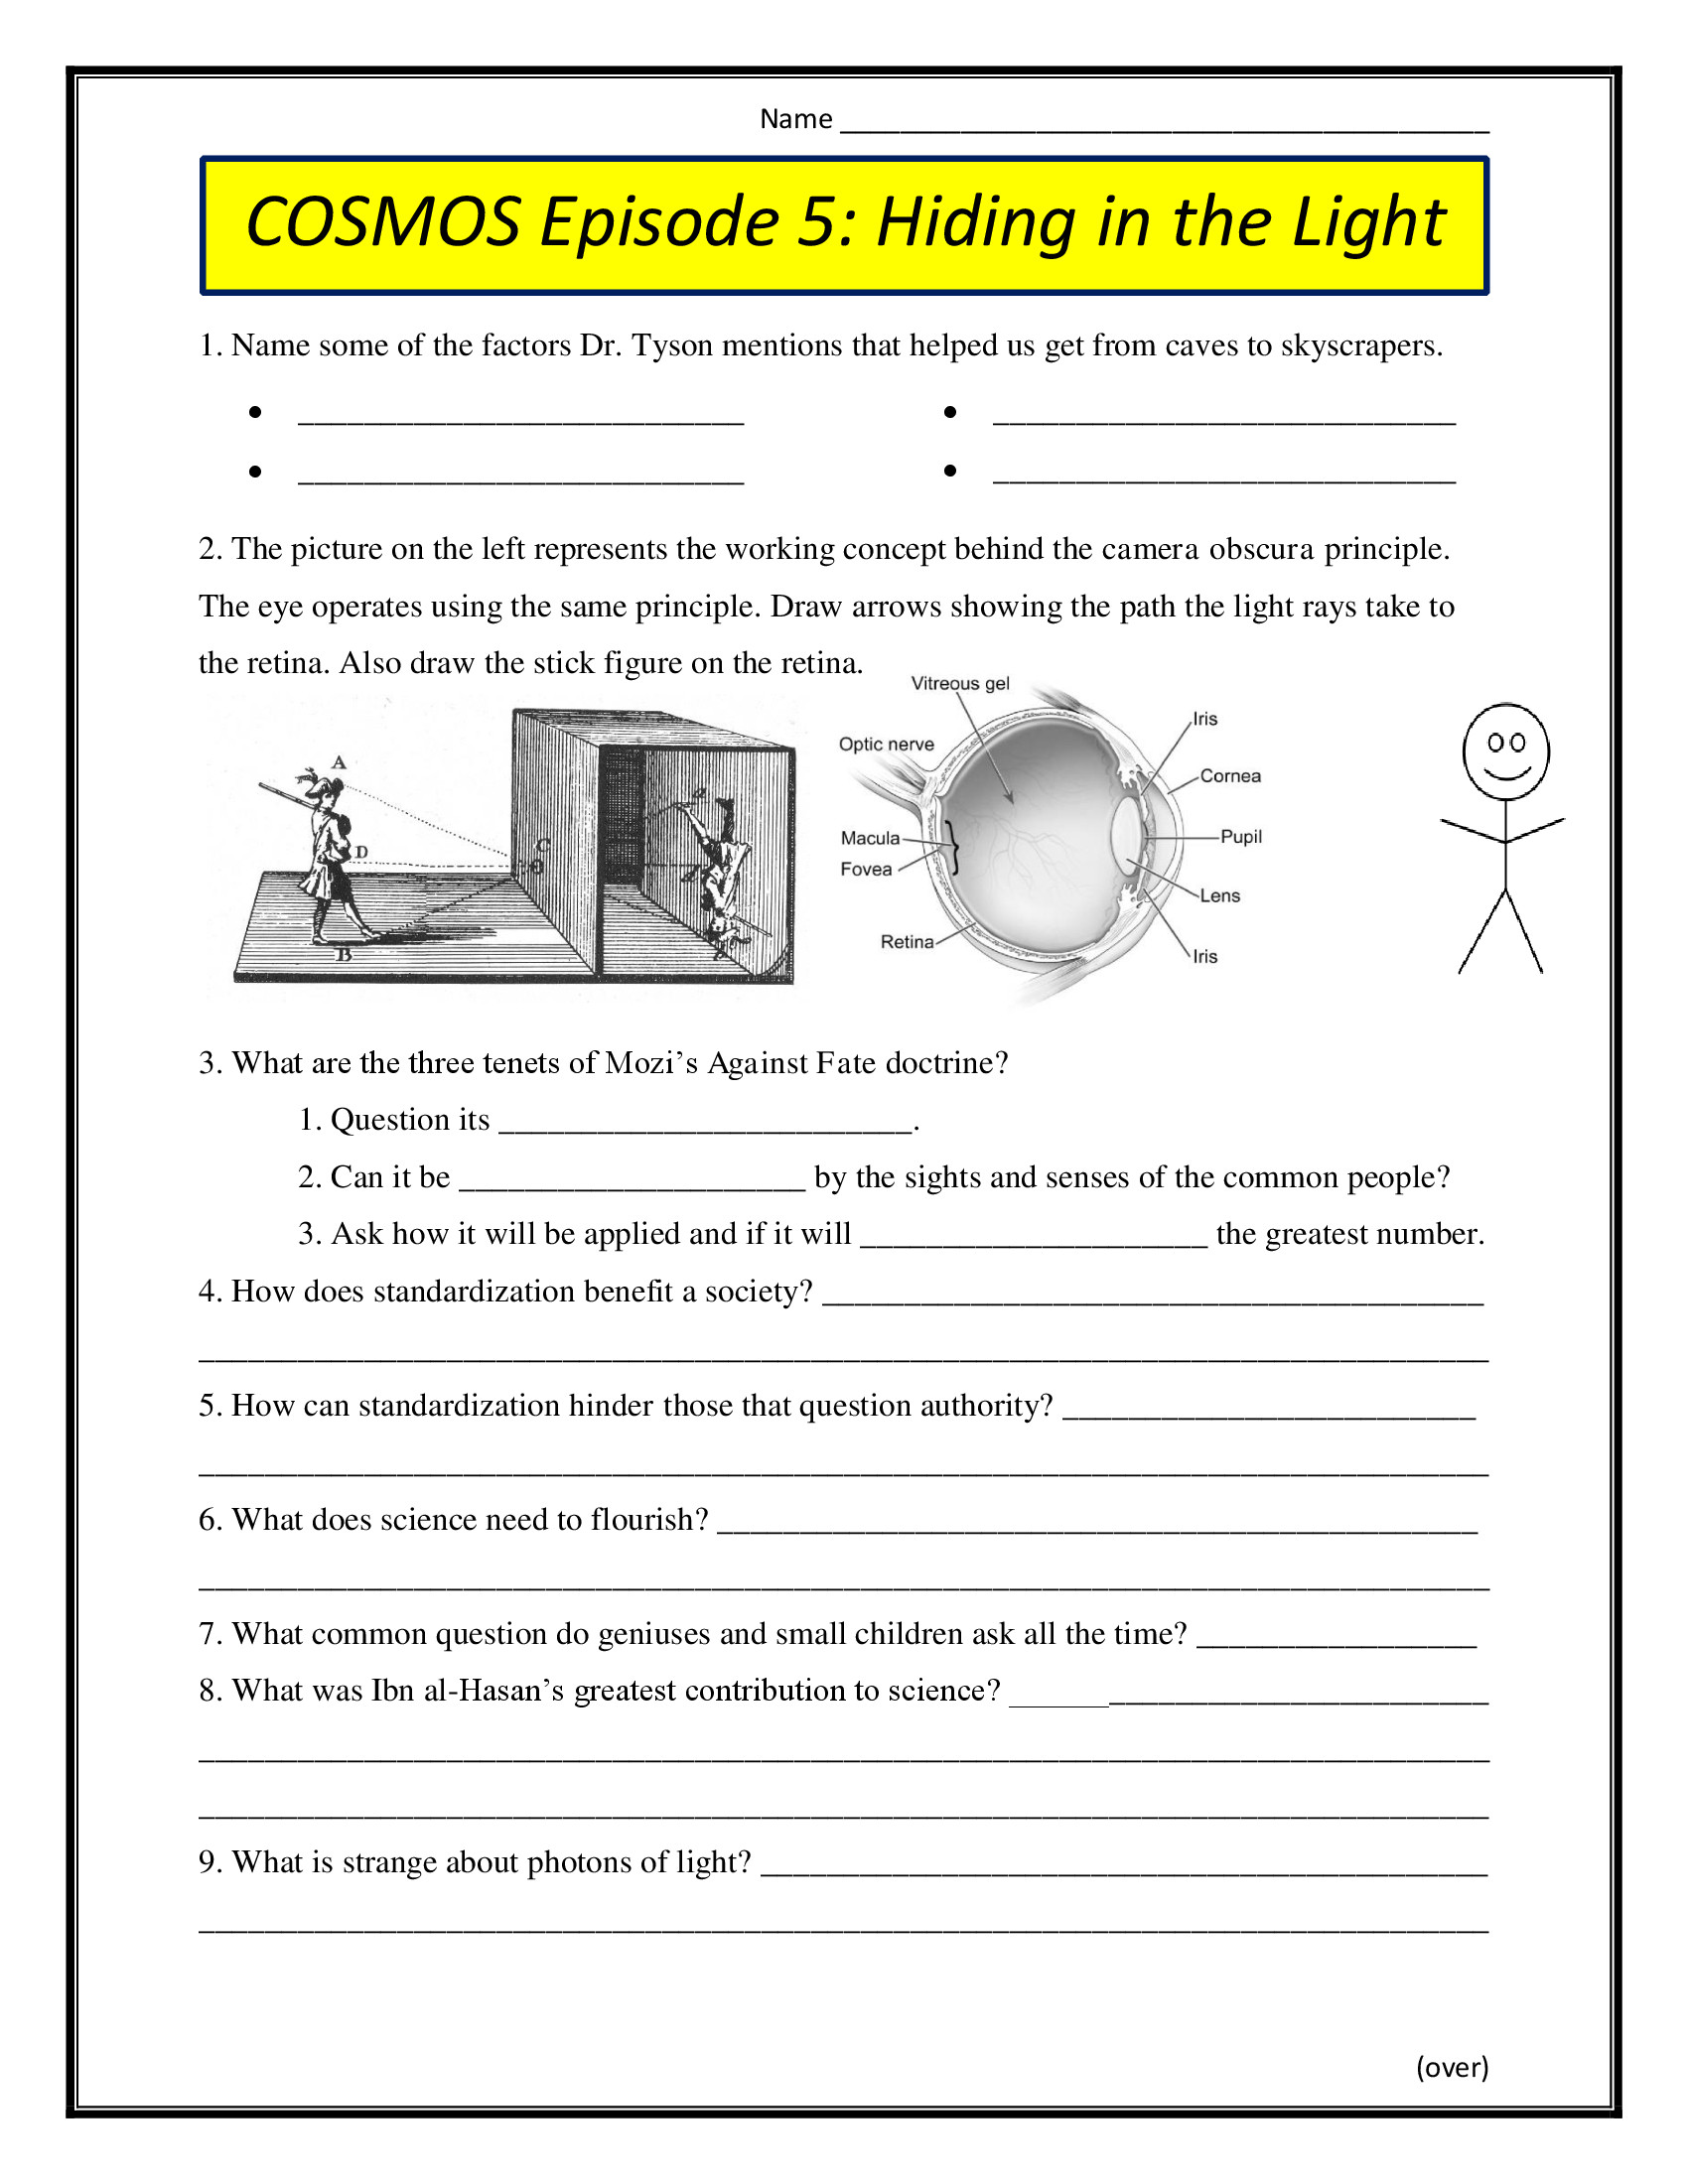 Cosmos Episode 1 Worksheet Answers Cosmos Episode 5 Hiding In the Light Worksheet 2014